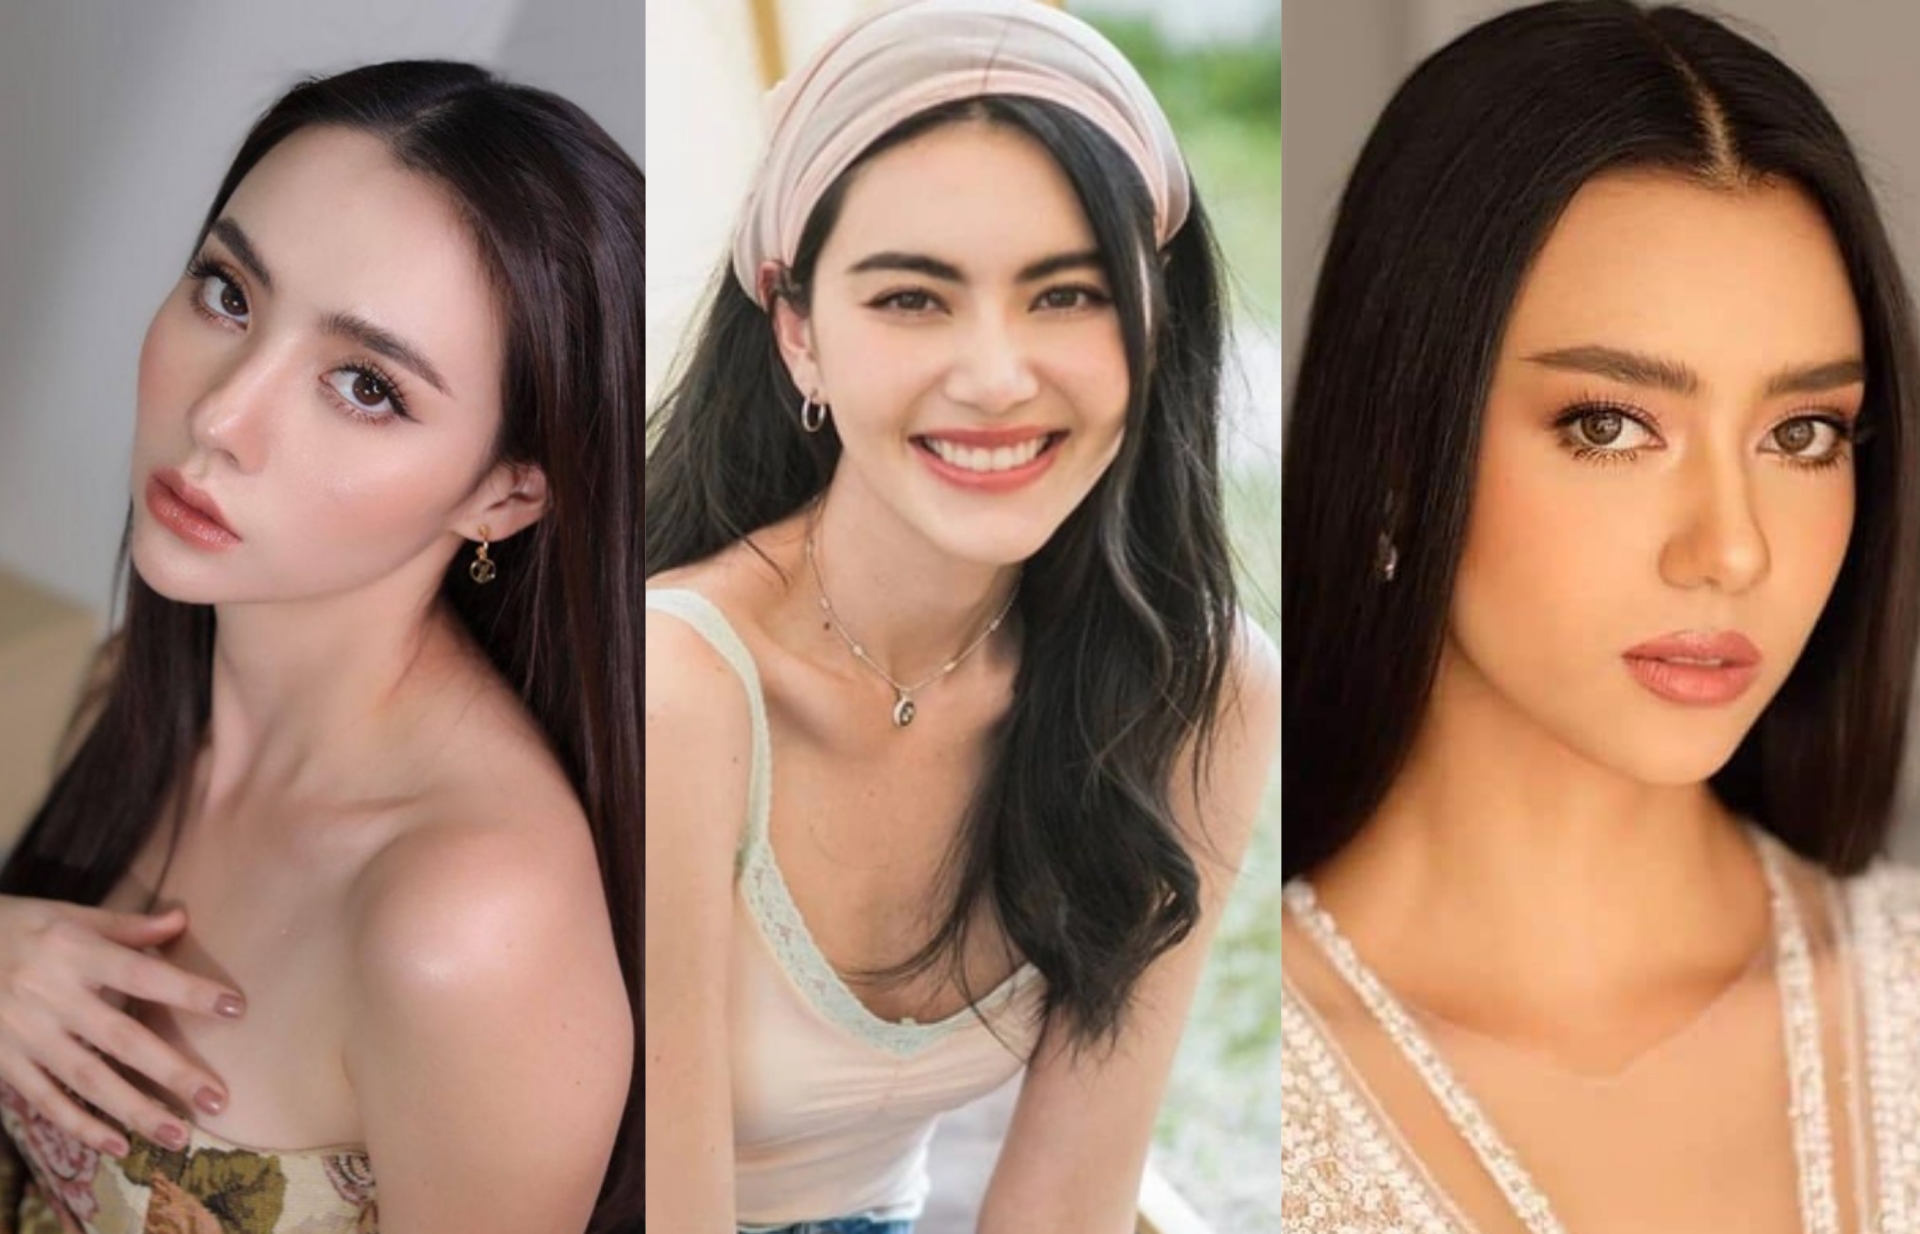 Top 15 Most Beautiful and Hottest Thai Women Today